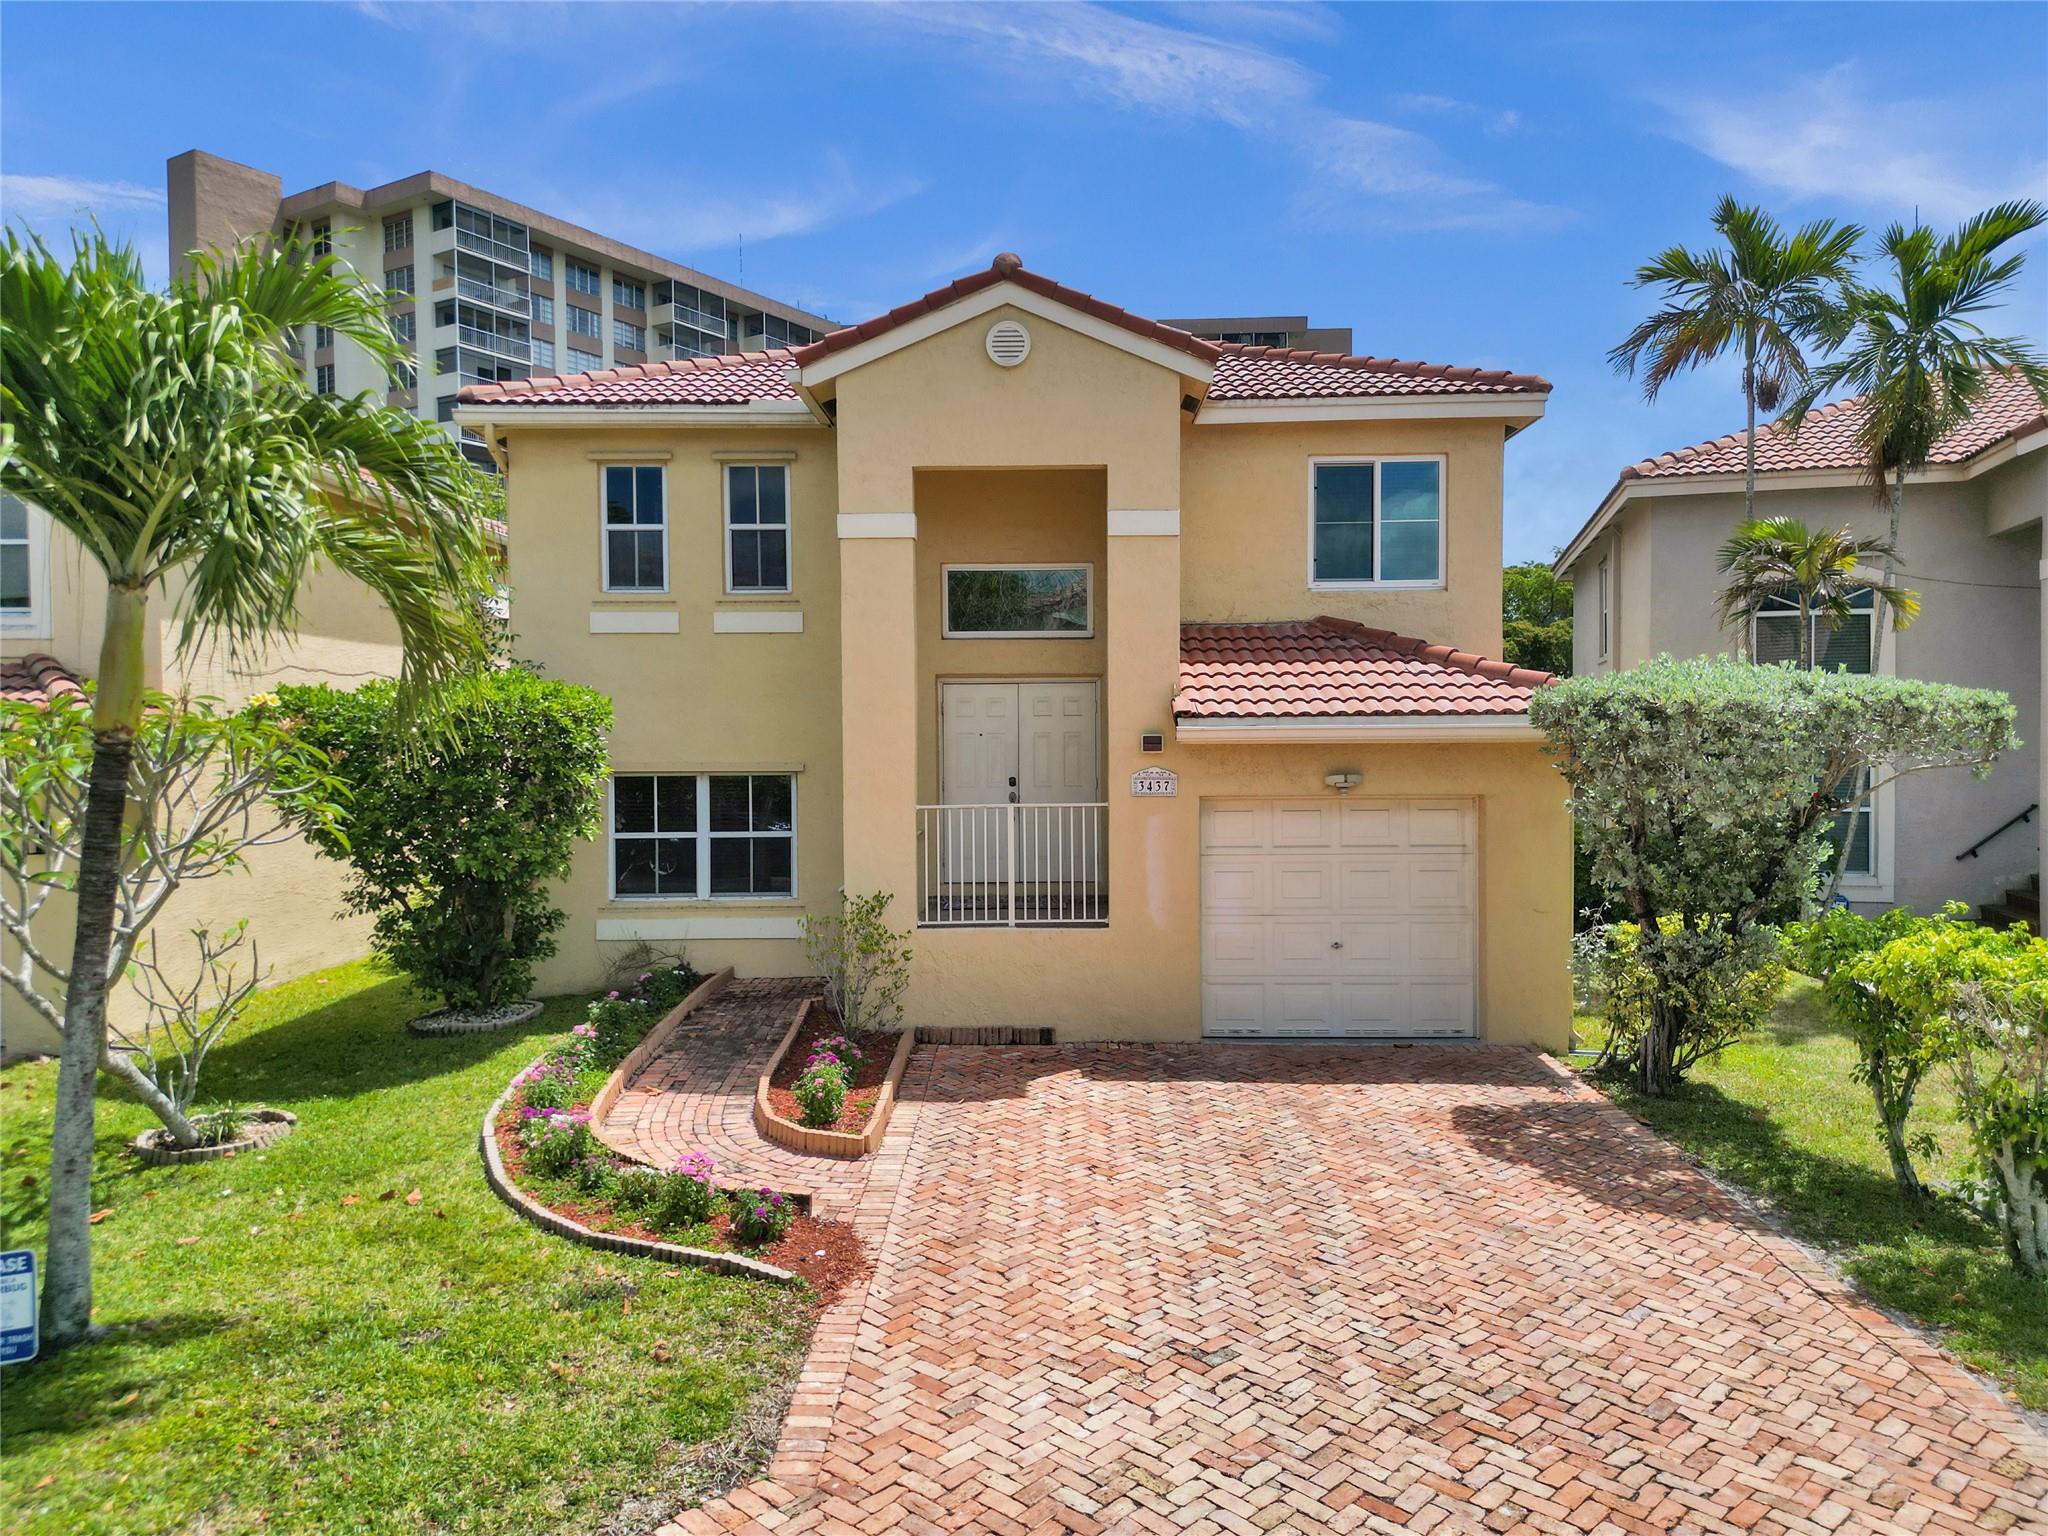 3437 NW 108TH TER, Coral Springs, FL 